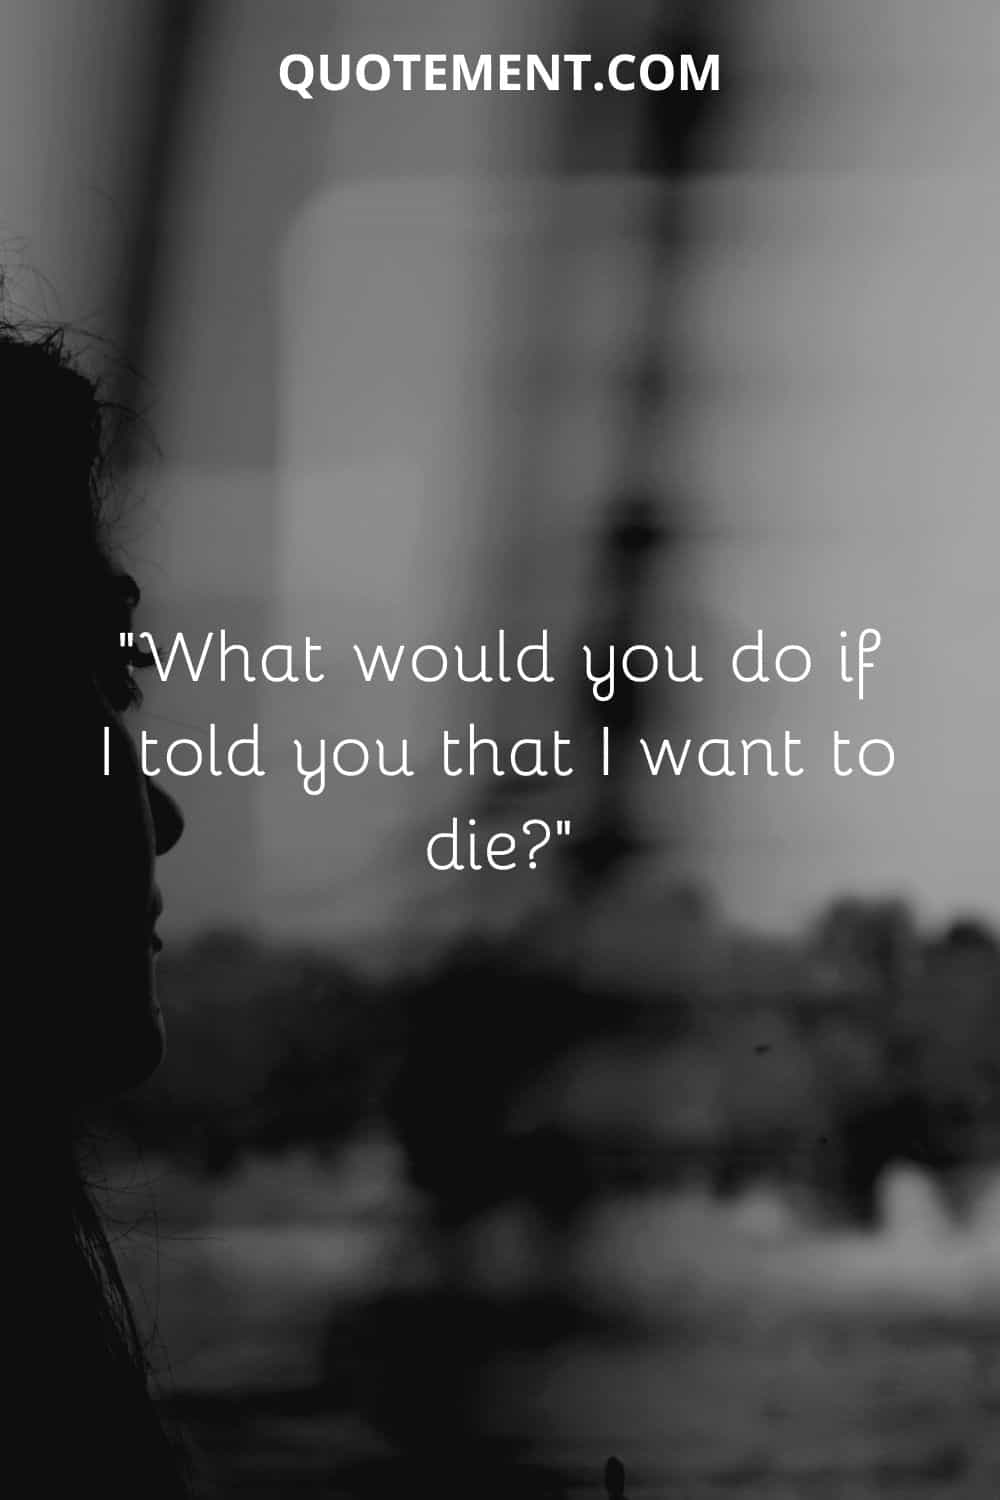 What would you do if I told you that I want to die